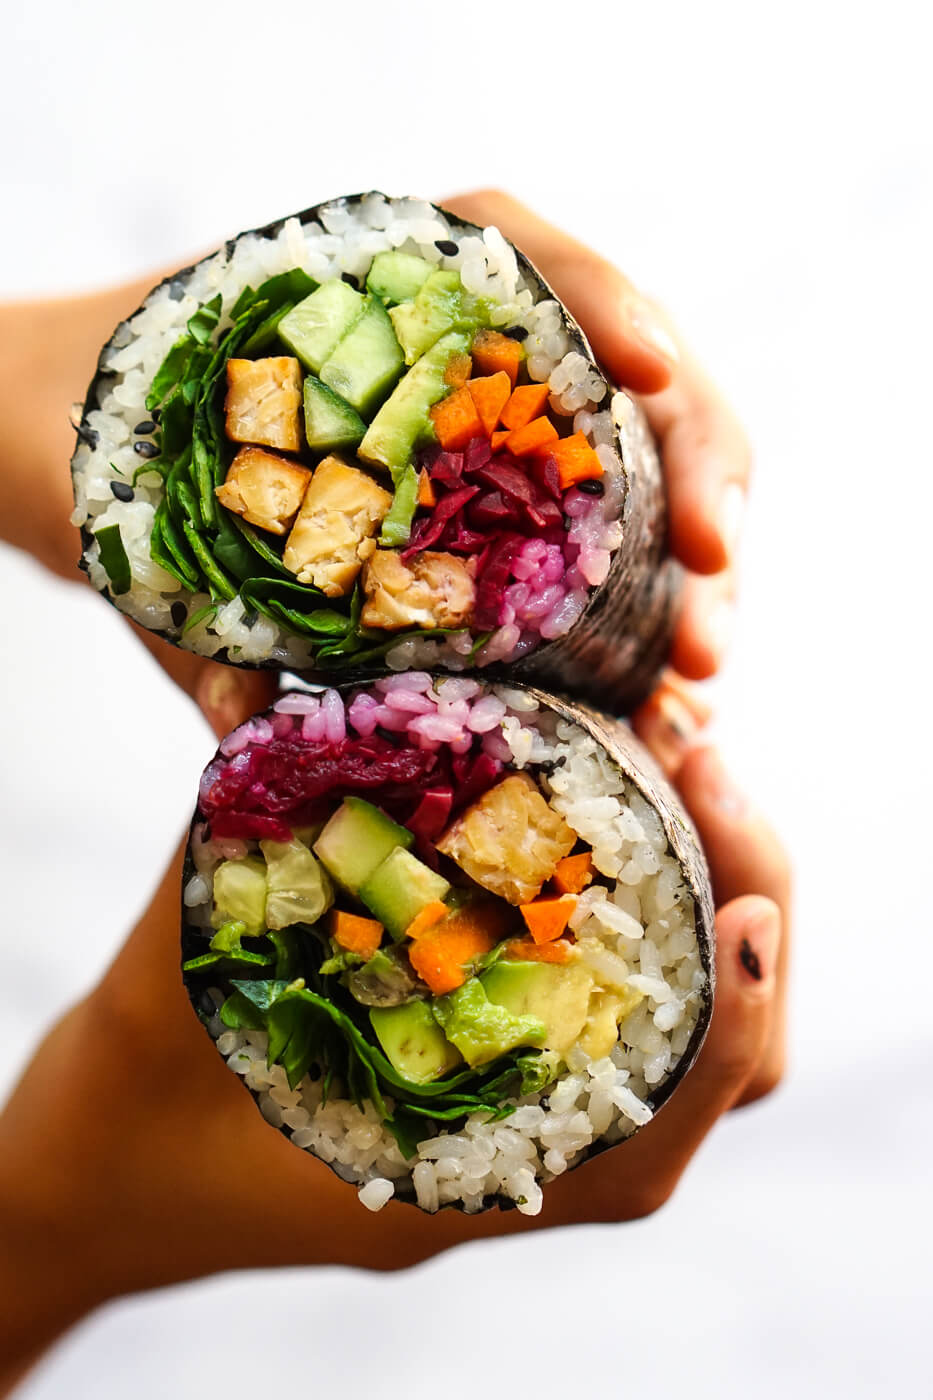 Photograph of hands holding two halves of a sushi burrito filled with vegetables and tempeh. 